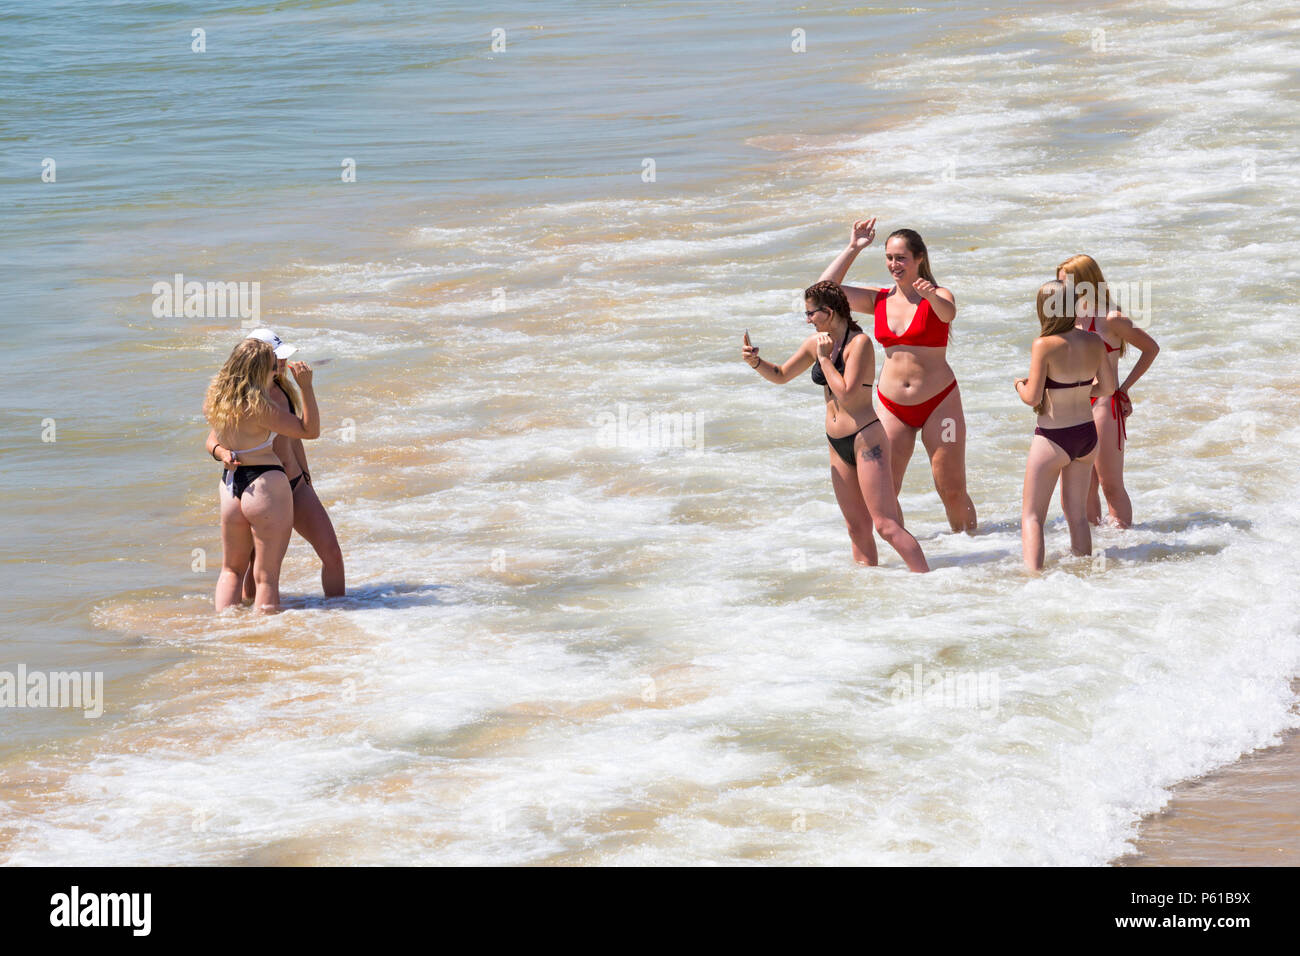 Bournemouth, Dorset, UK. 28th June 2018. UK weather: sunseekers head to the beaches at Bournemouth on another hot sunny day with unbroken blue skies and sunshine. A slight breeze makes the heat more bearable.  A group of friends in skimpy bikinis have fun playing in the sea and taking photos. Credit: Carolyn Jenkins/Alamy Live News Stock Photo